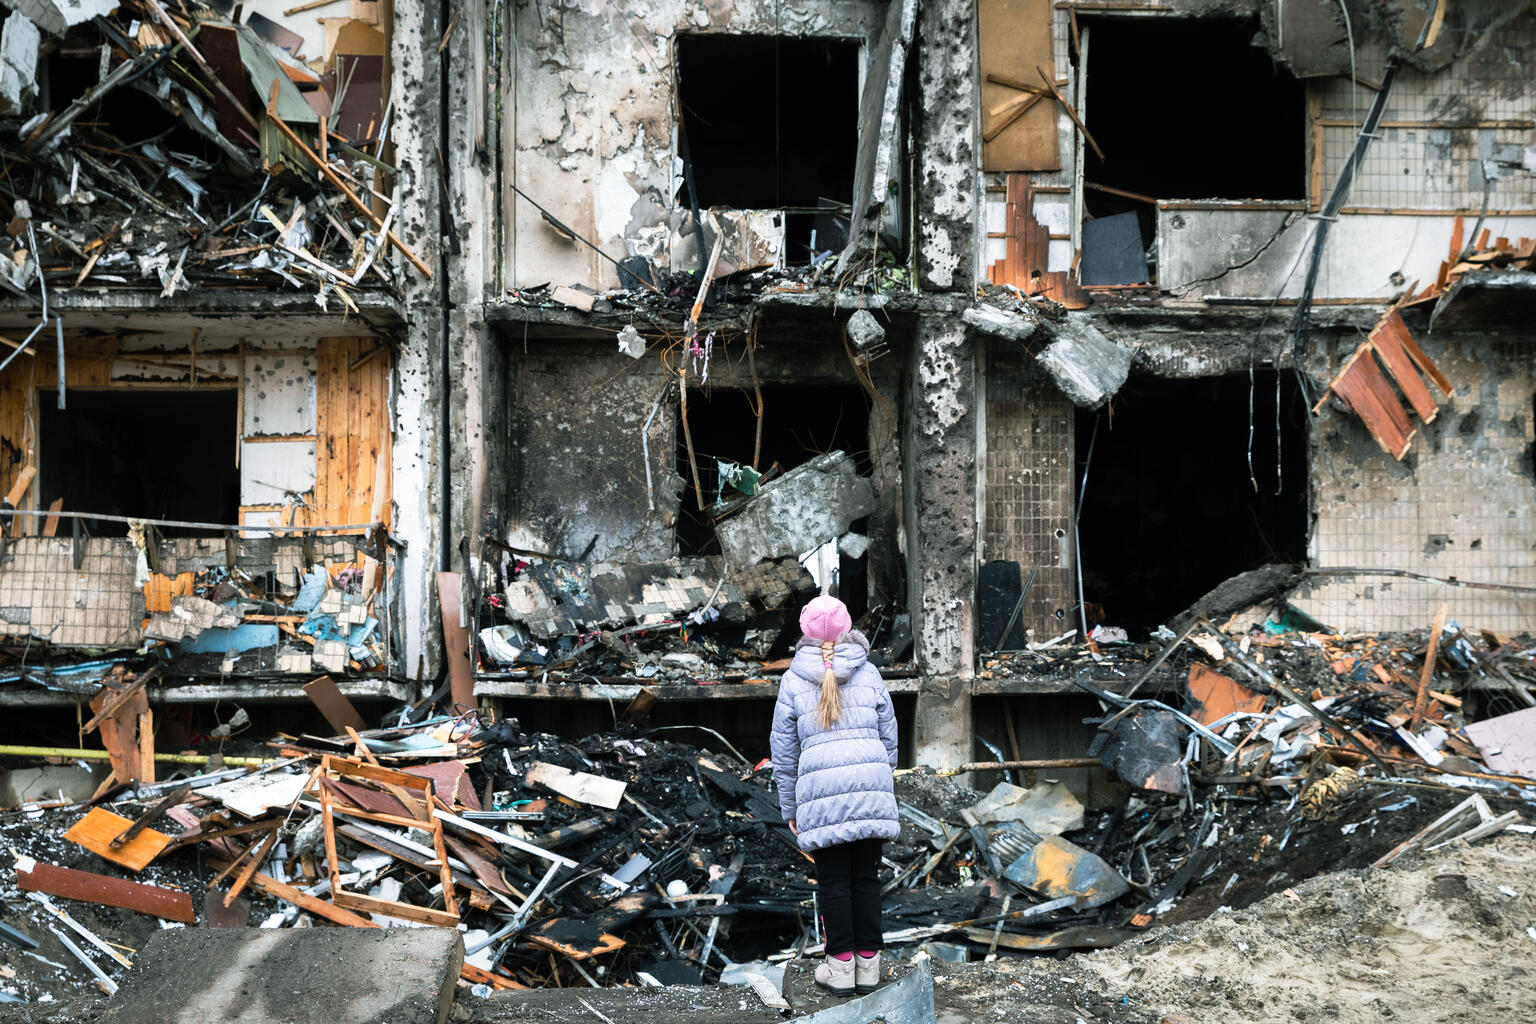 On 25 February 2022 in Kyiv, Ukraine, a girl looks at the crater left by an explosion in front of an apartment building which was heavily damaged during escalating conflict.